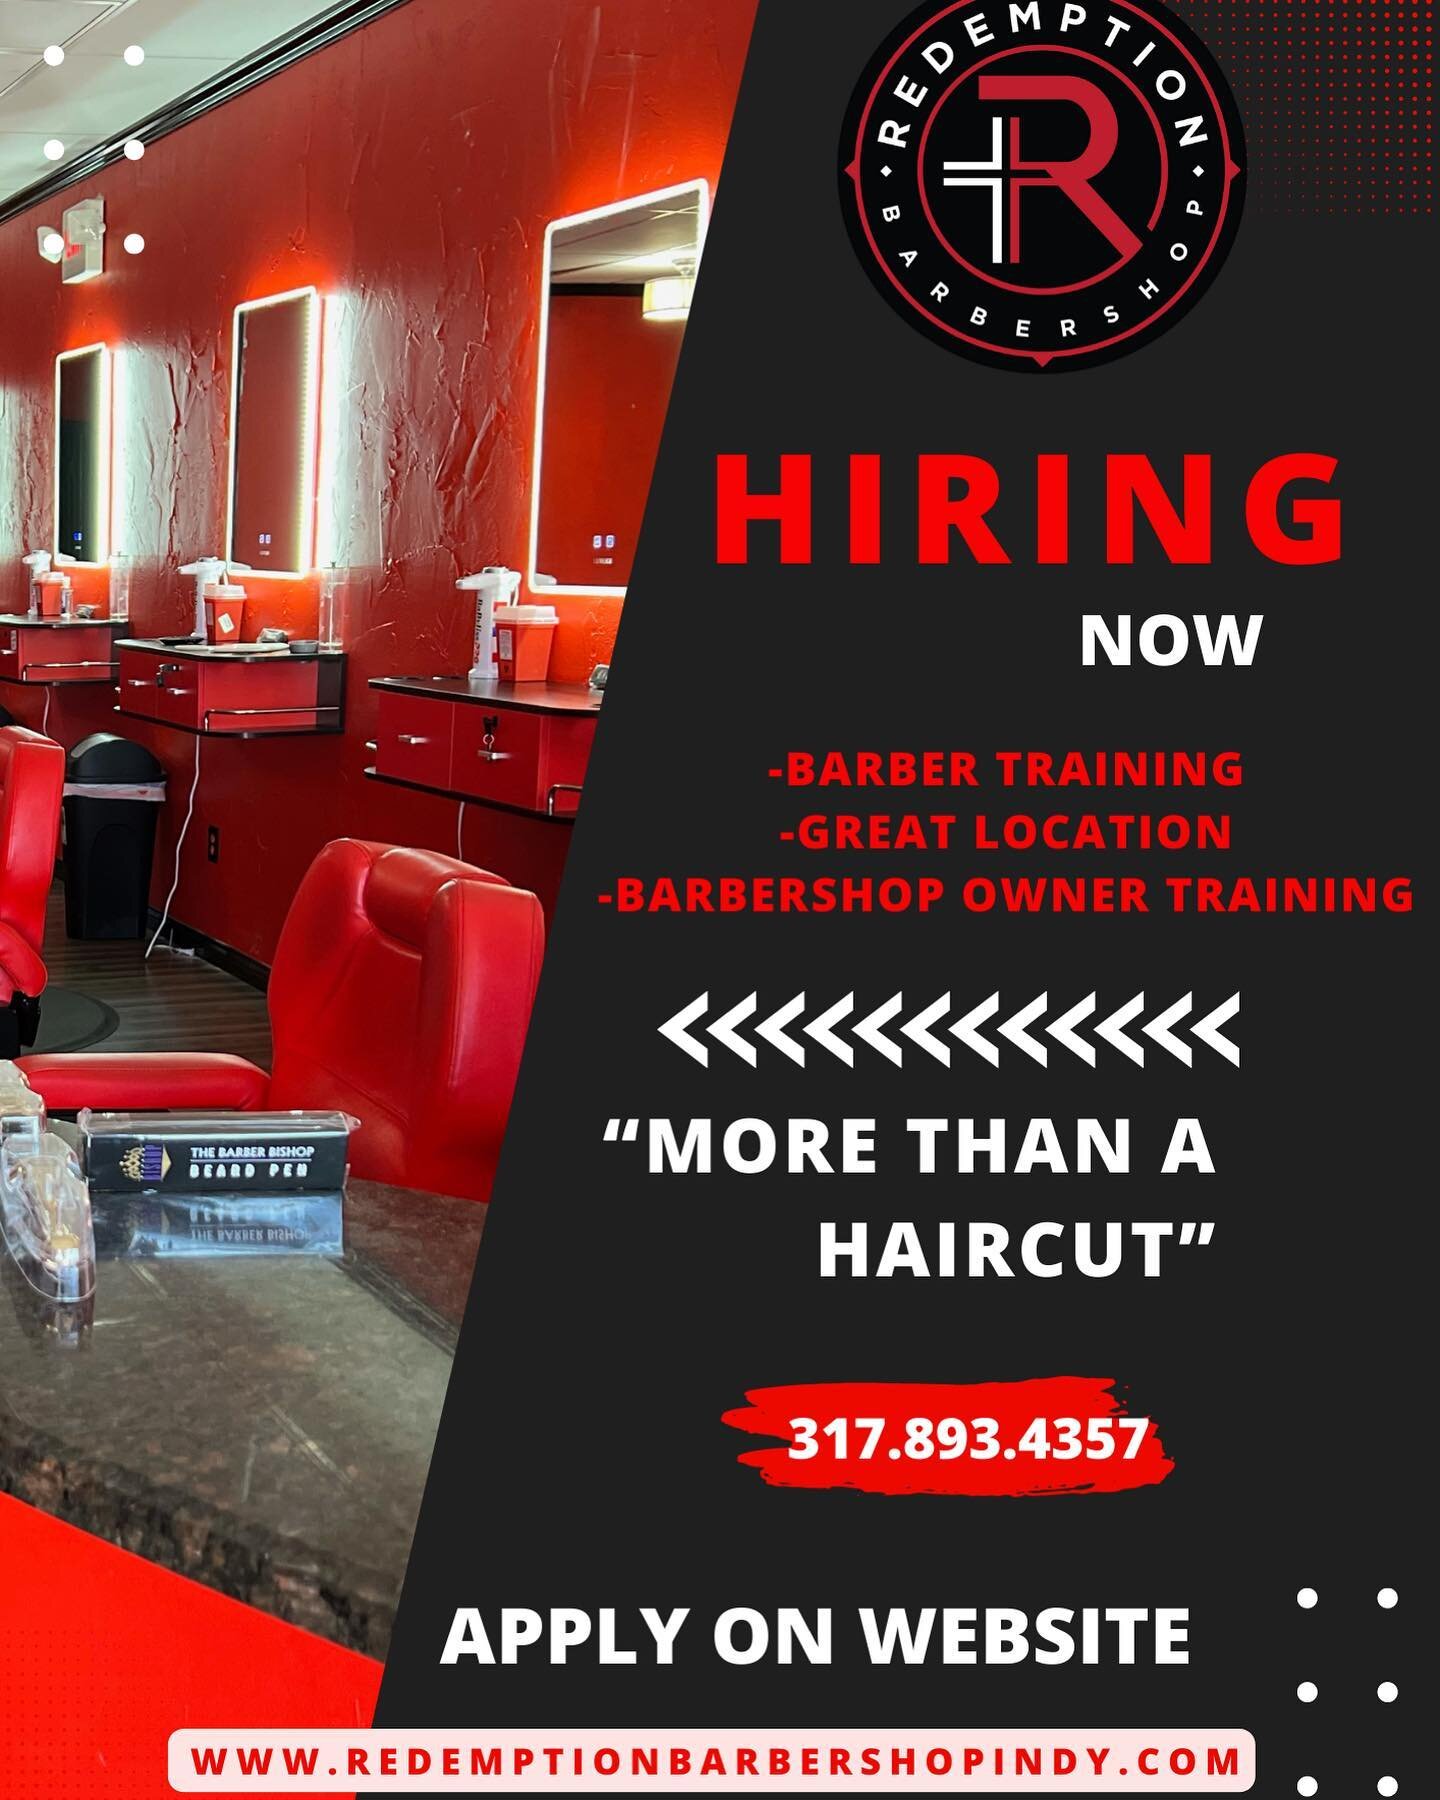 LOOKING FOR A PEACEFUL ENVIRONMENT TO WORK AND GROW PROFESSIONALLY ALONGSIDE OF A MASTER BARBER WHO IS A COMPASSIONATE LEADER AND EDUCATOR? #indianapolis #greenwoodindiana #southindy #downtownindy #barberlife #beard #fade